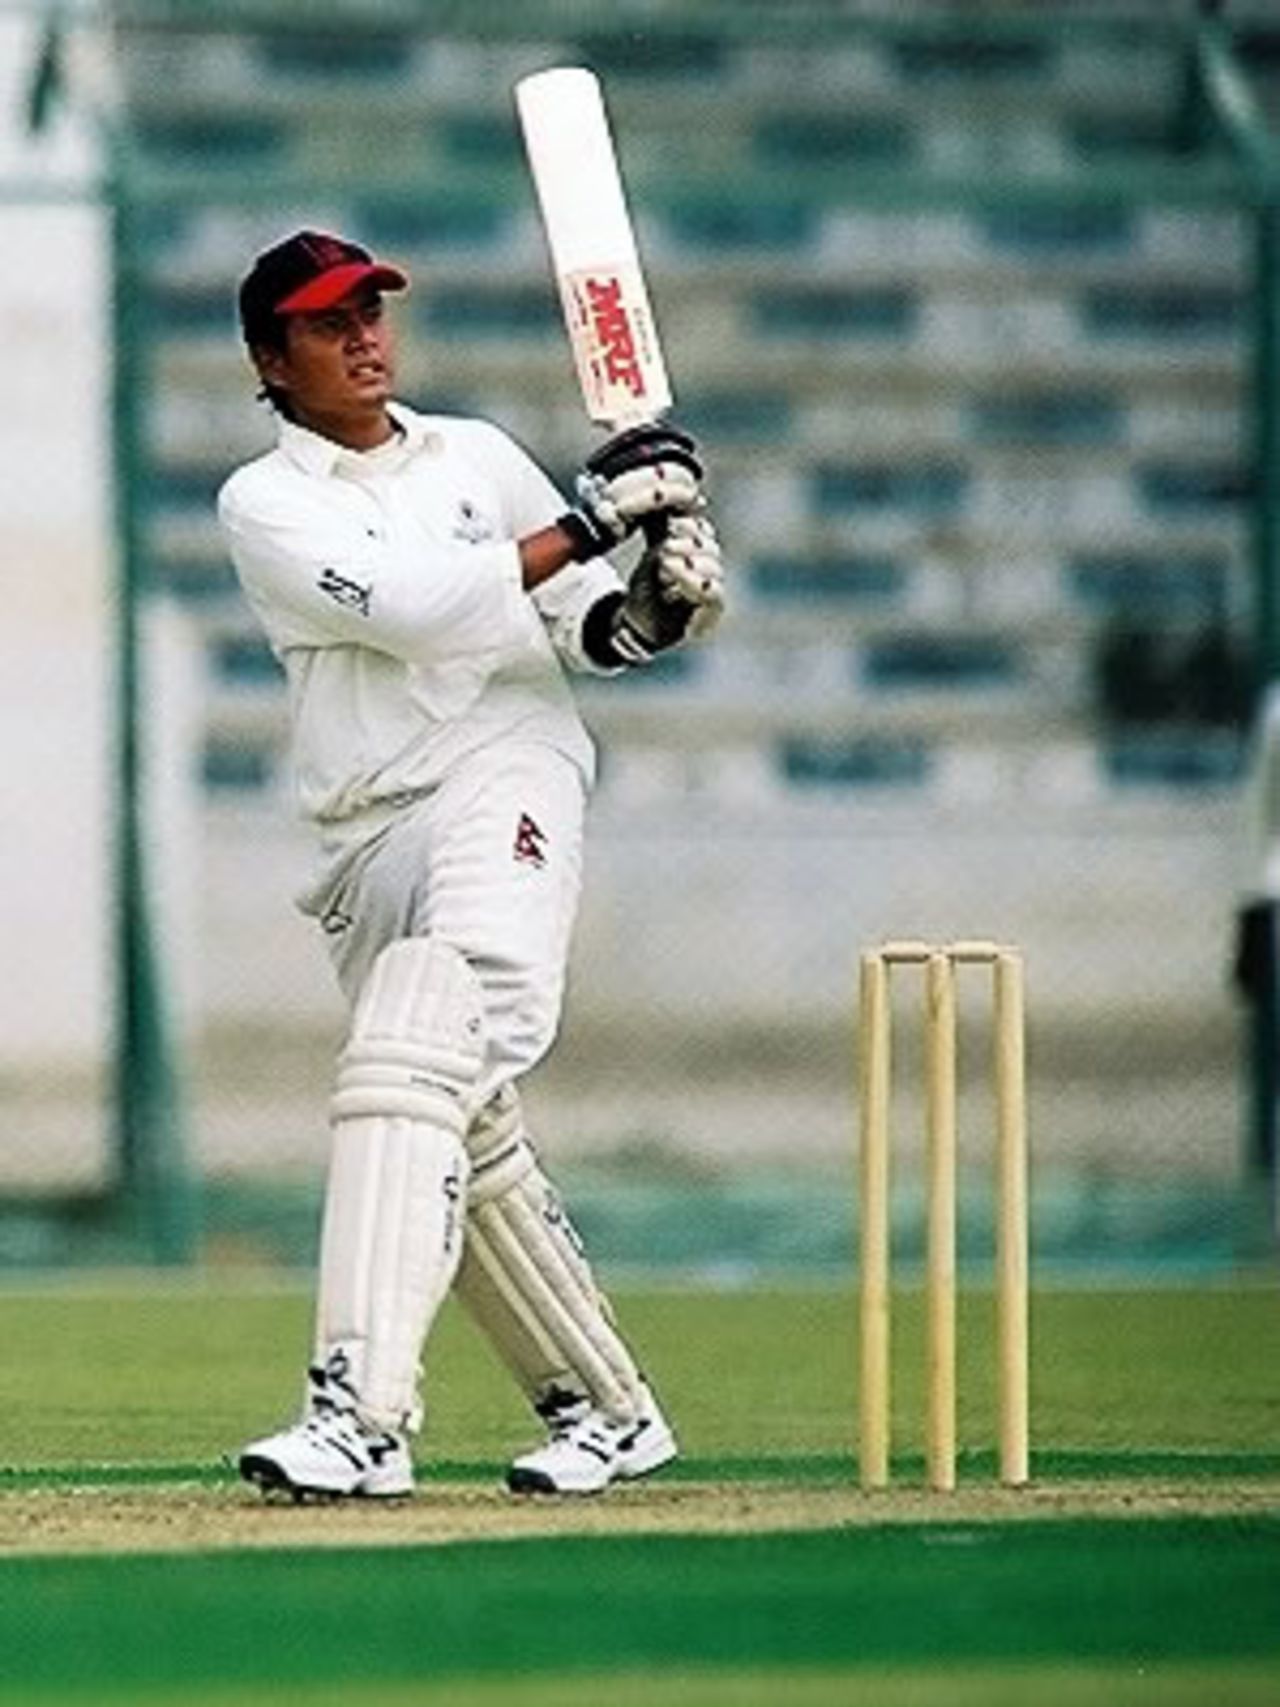 Nepal's opener Yashwant Subedi hits to leg during his innings of 63, Nepal Under-19s v Maldives Under-19s at National Stadium Karachi, Youth Asia Cup 2003, 14 July 2003.